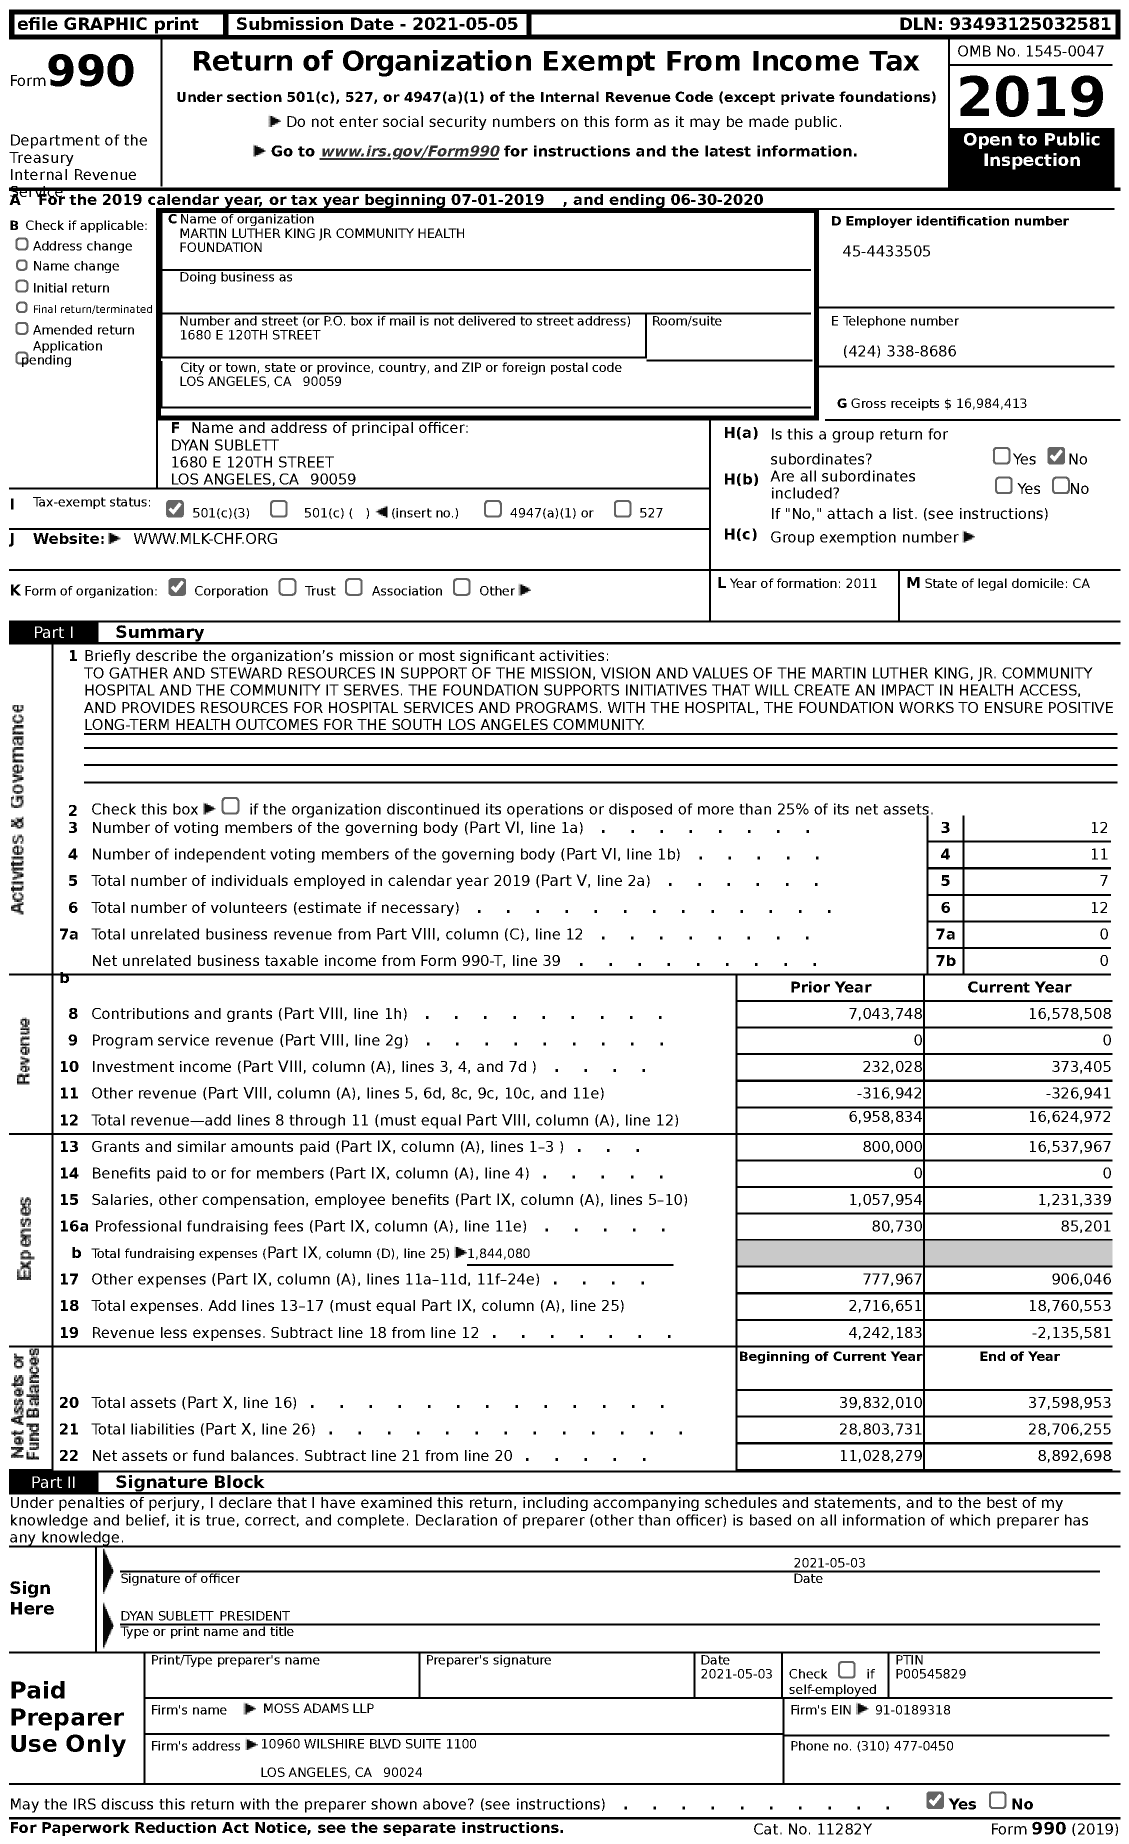 Image of first page of 2019 Form 990 for Martin Luther King Jr Community Health Foundation